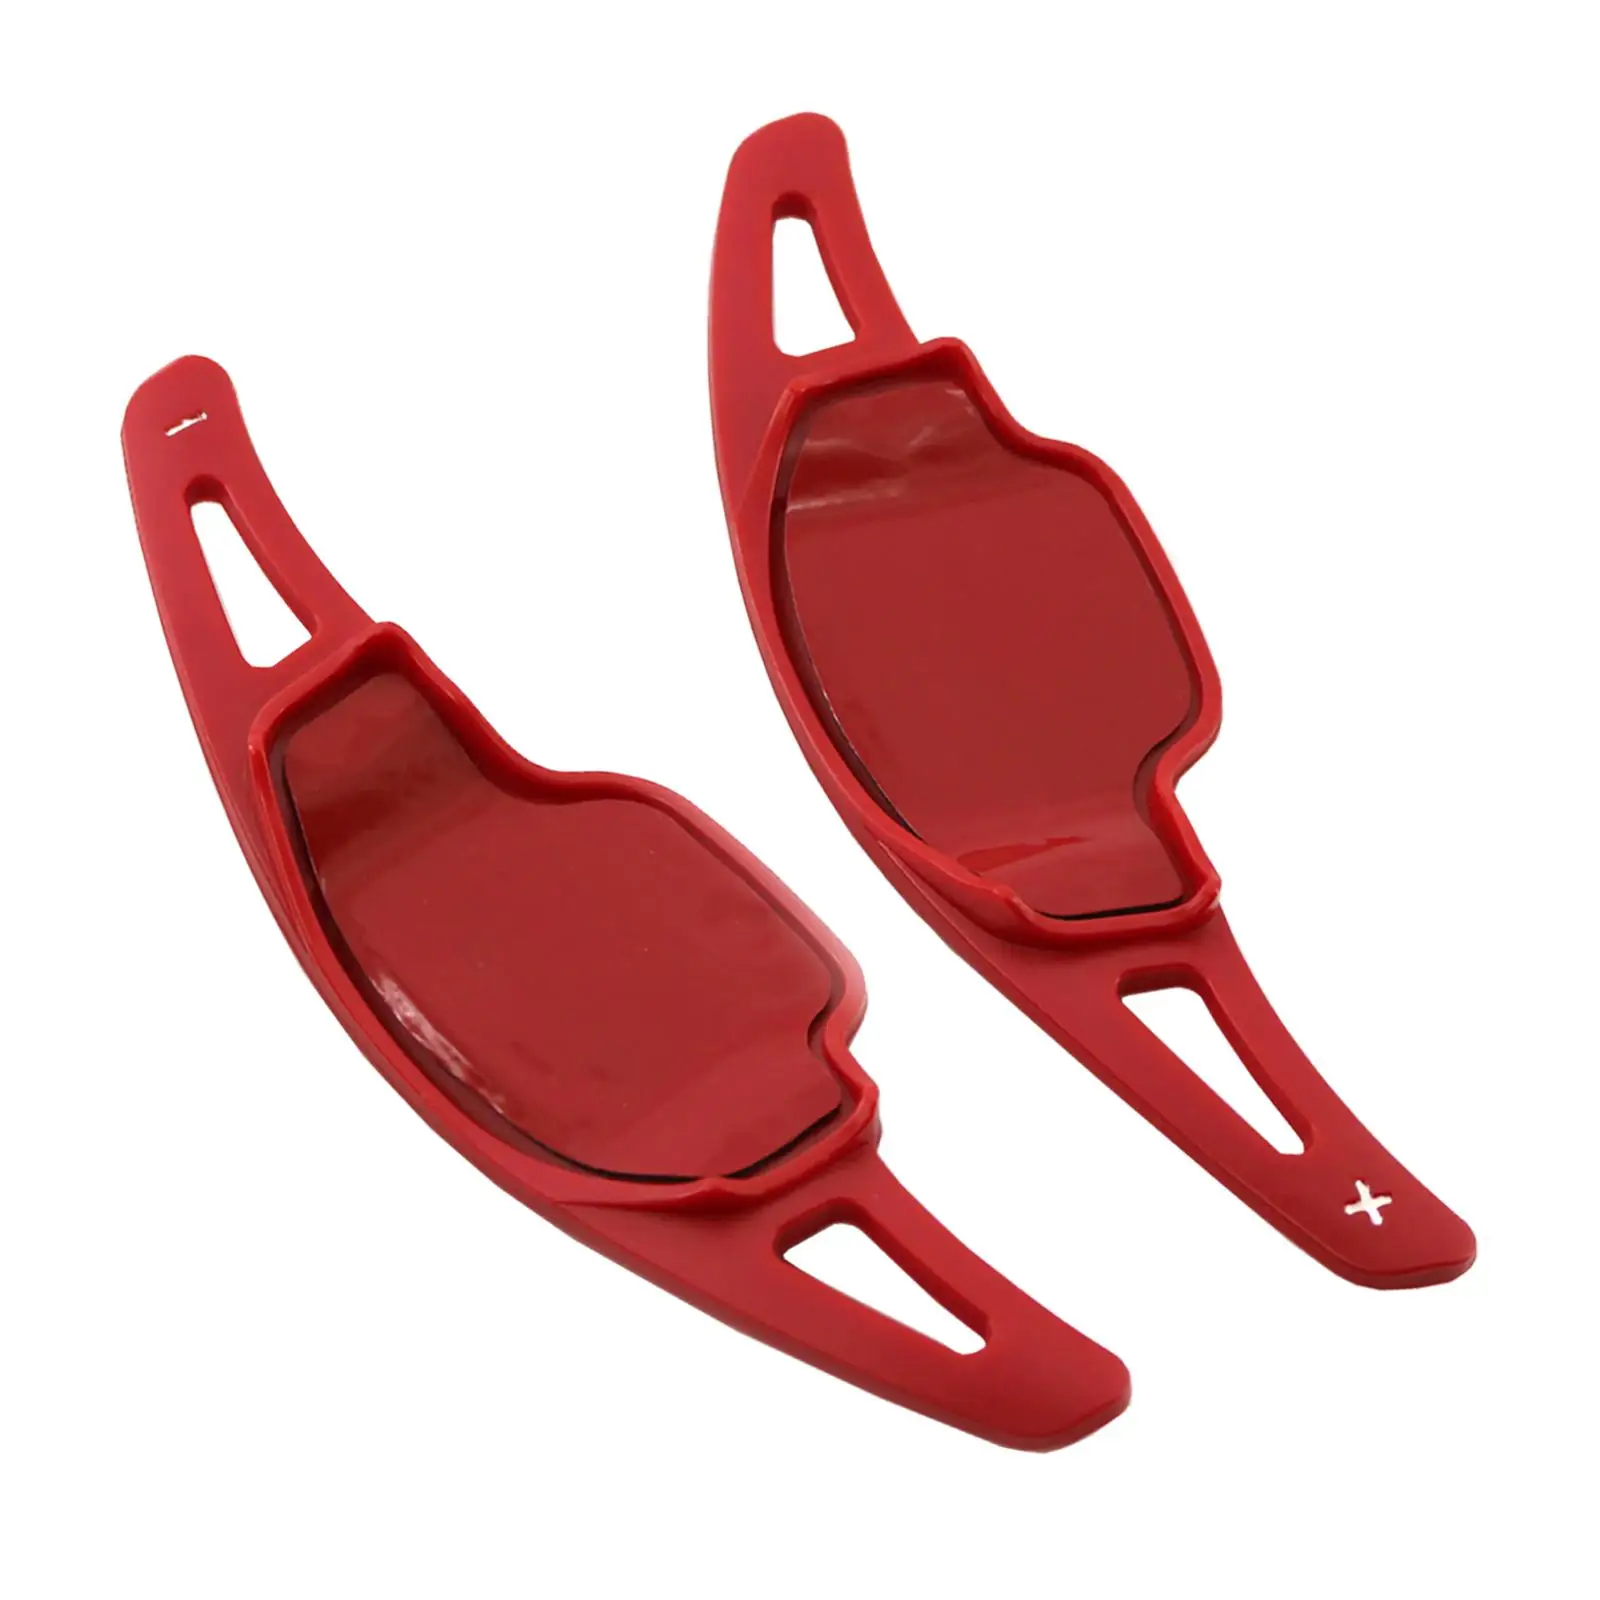 2x Automotive Steering Paddle Shifter Extension Cover Larger Red Plastic Paddle Blade Fit for Chevy Camaro 2012-2015